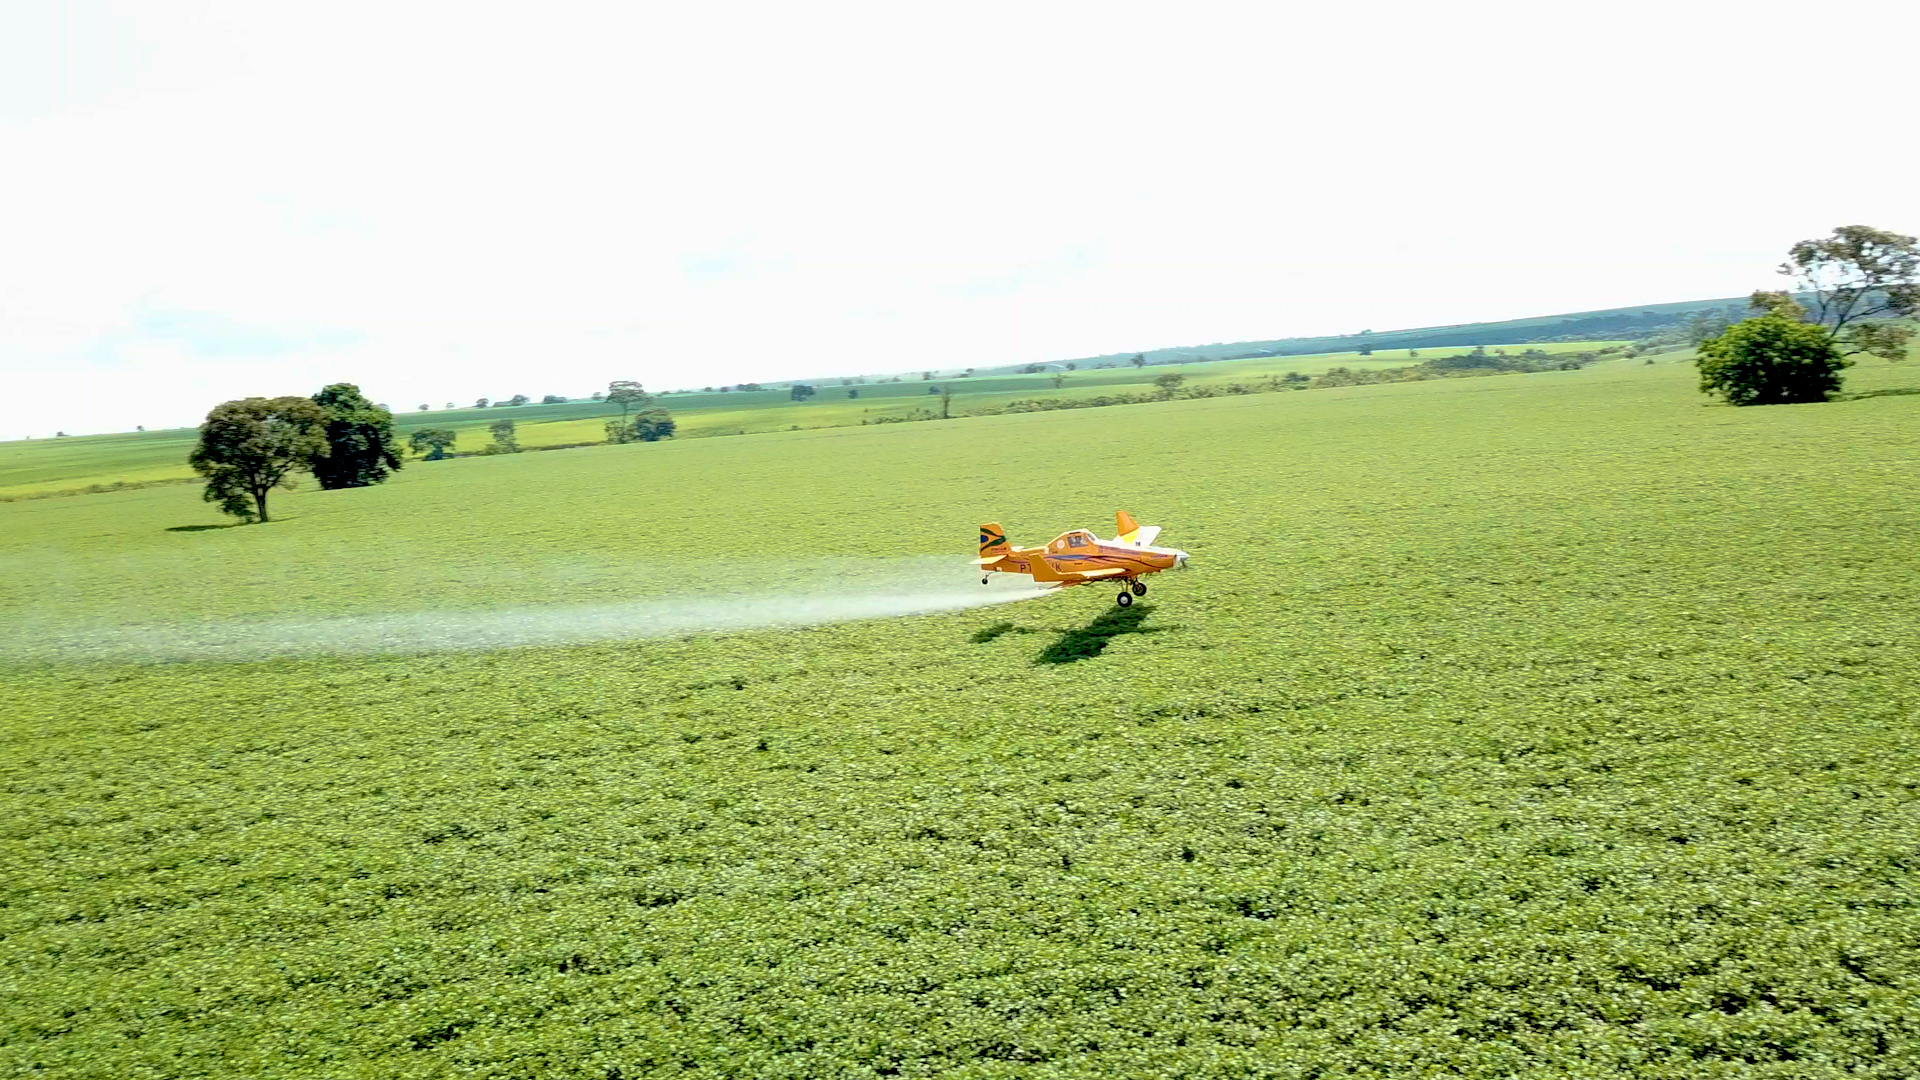 Whenever sprayer drones or planes go near the hives, the sprayer turns off automatically